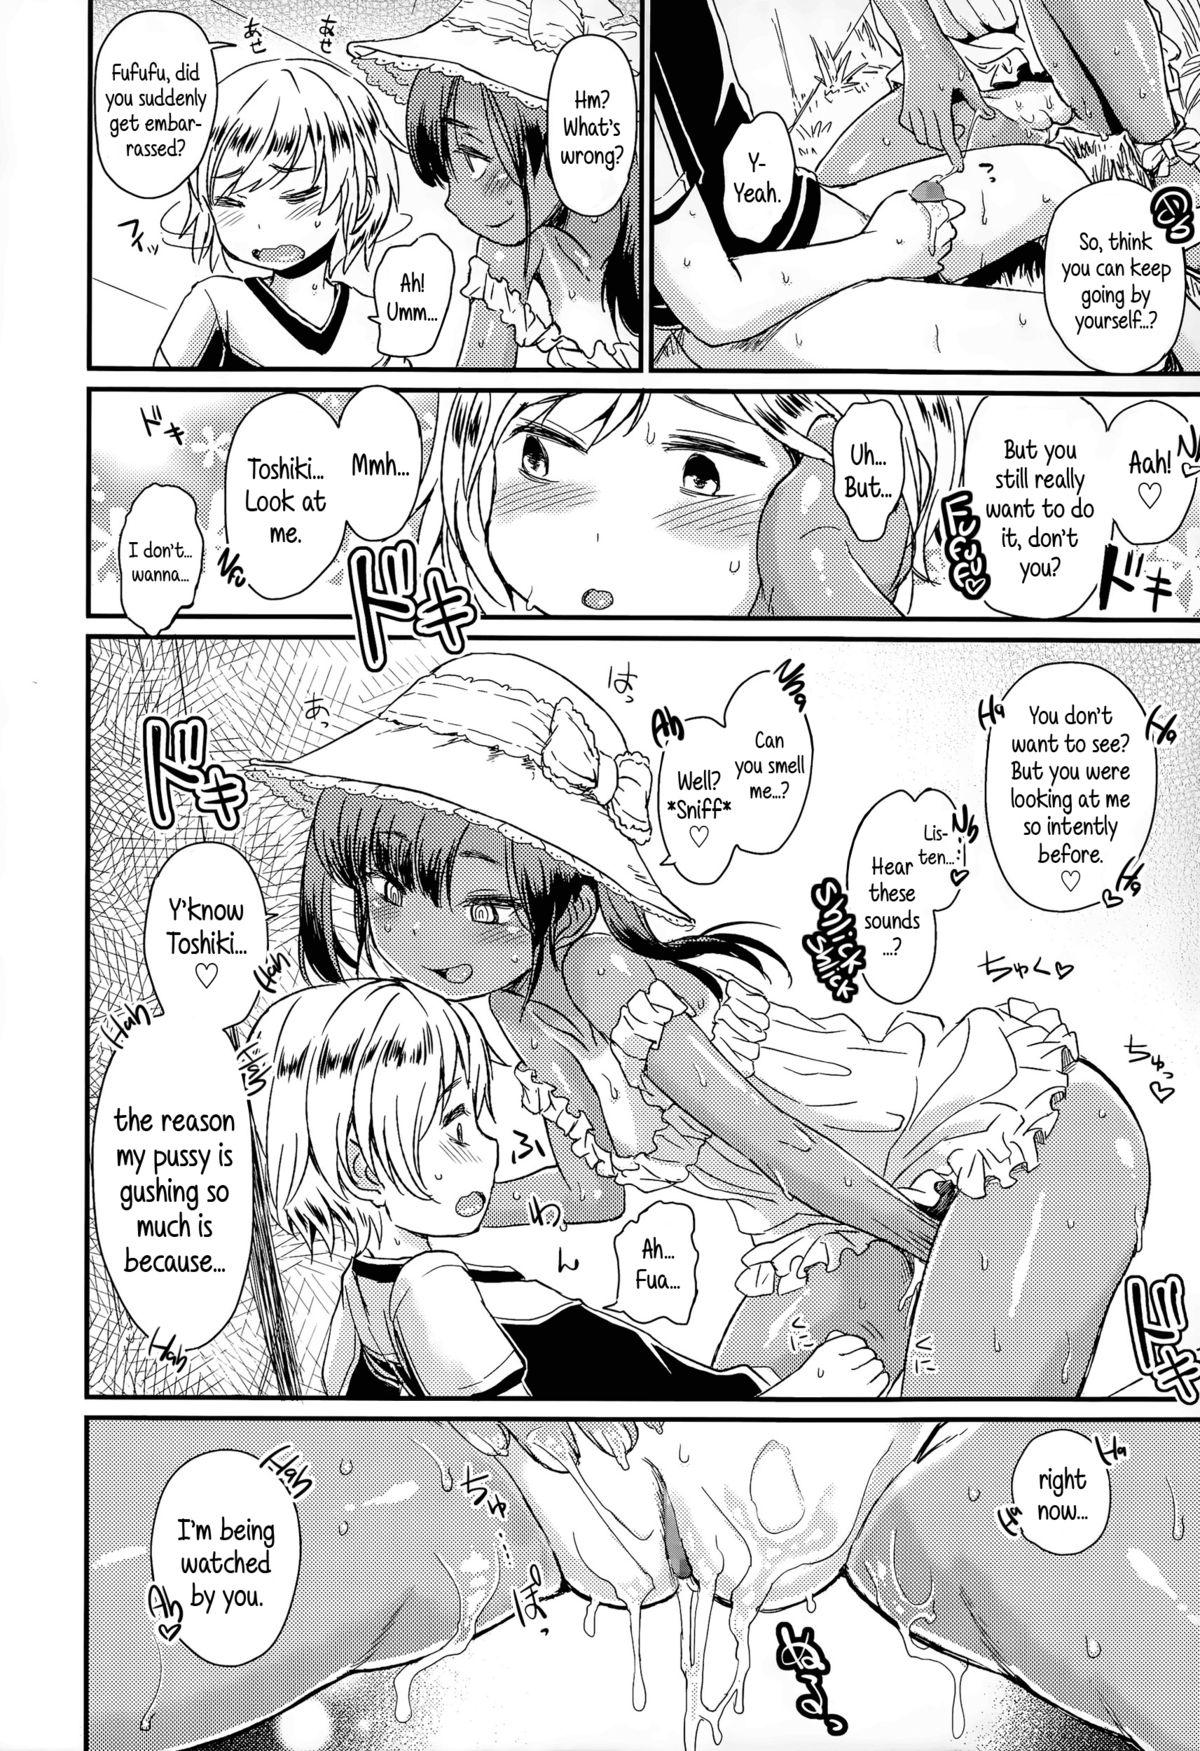 Best Blowjob Jiyuukenkyuu | Independent Research Reality Porn - Page 8